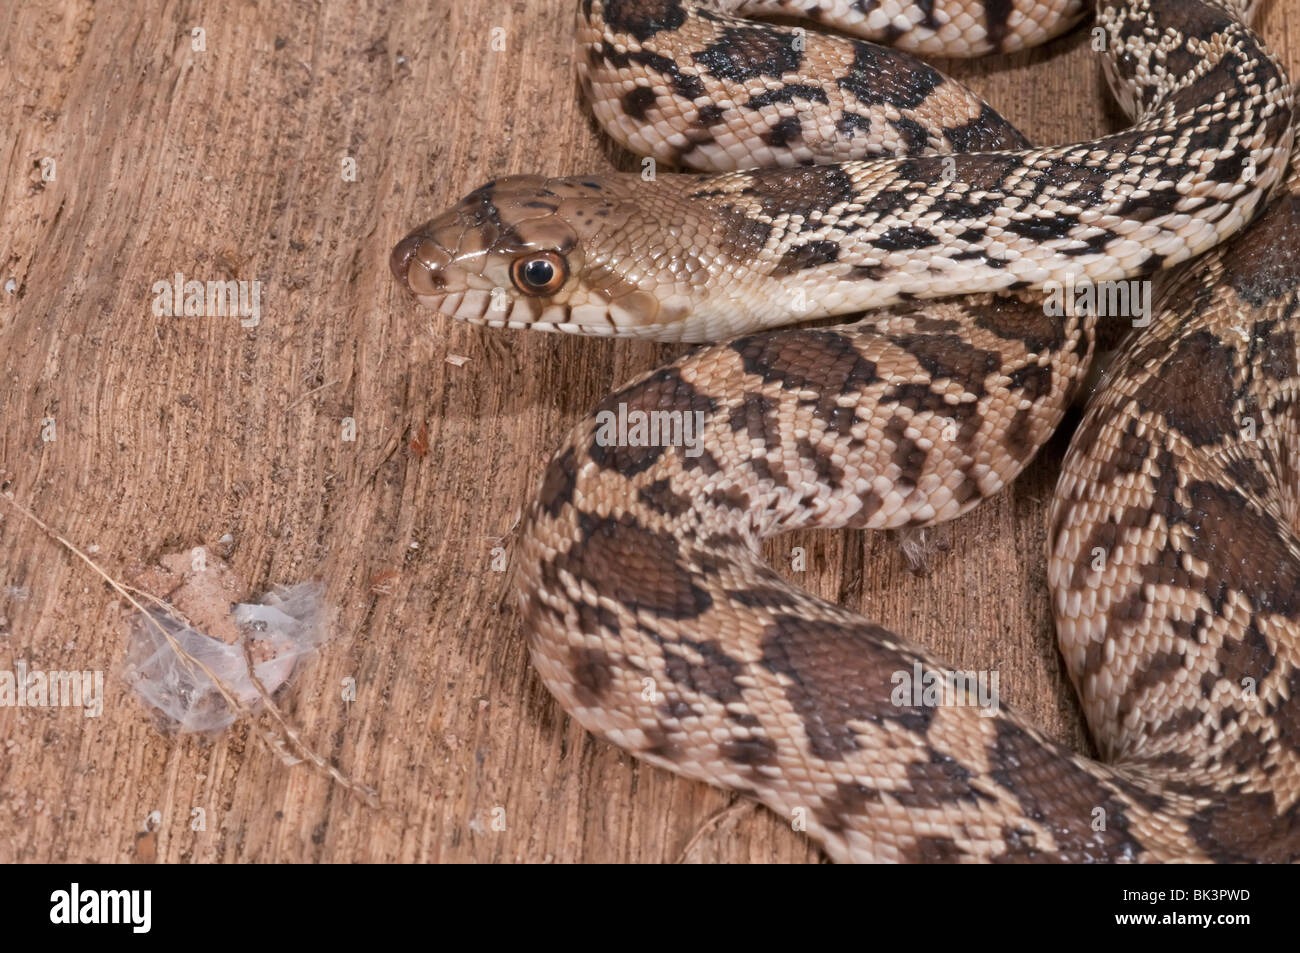 Yearling bull snake, Pituophis catenifer, native to western United States Stock Photo